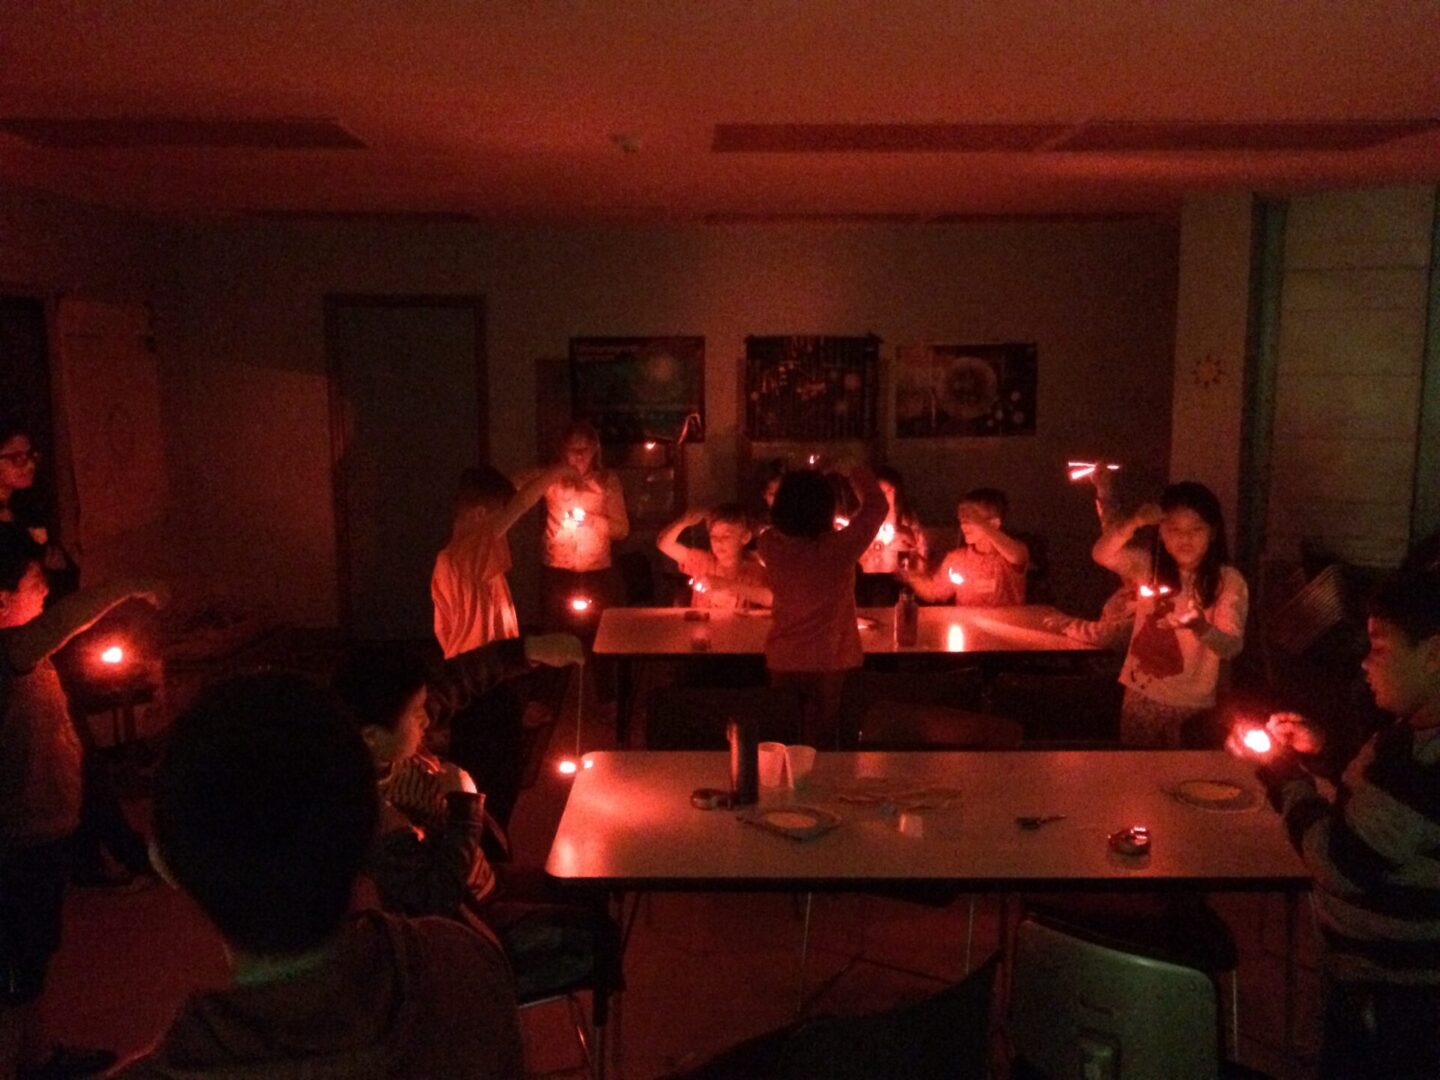 Group of people in a dimly lit room.